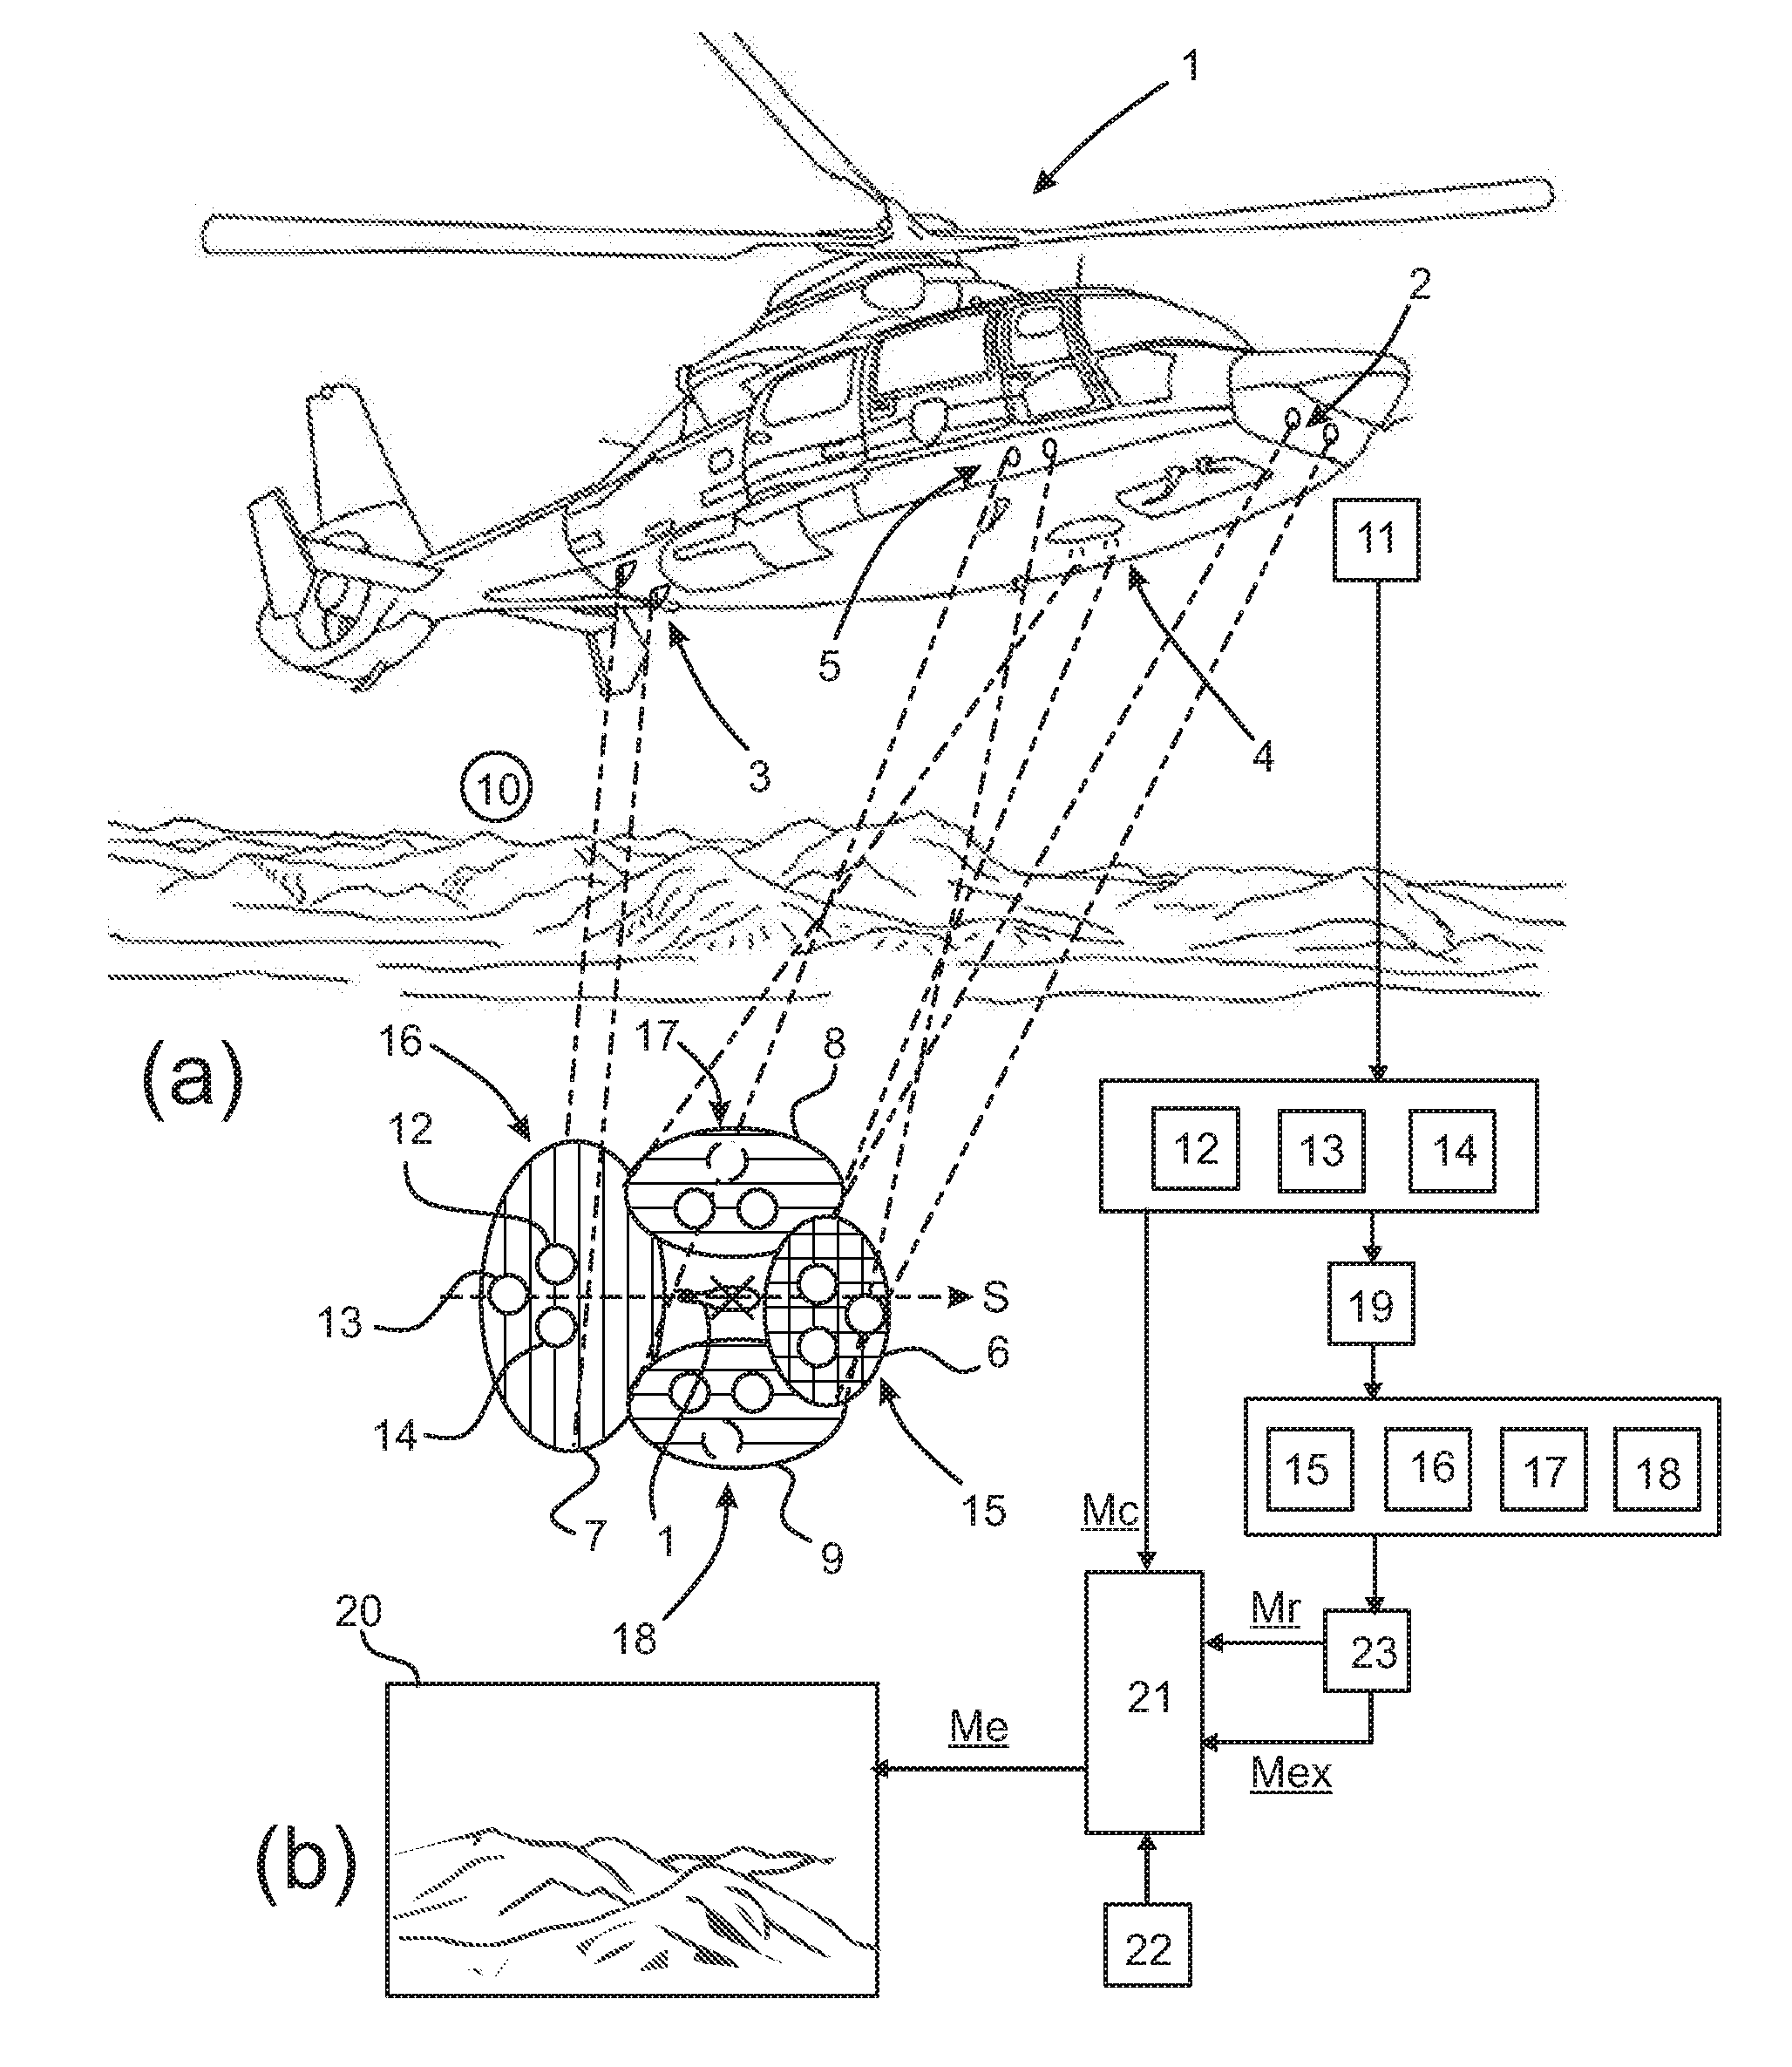 Method of assisting in the navigation of a rotorcraft by dynamically displaying a representation of the outside world constructed in flight in instantaneous and/or deferred manner